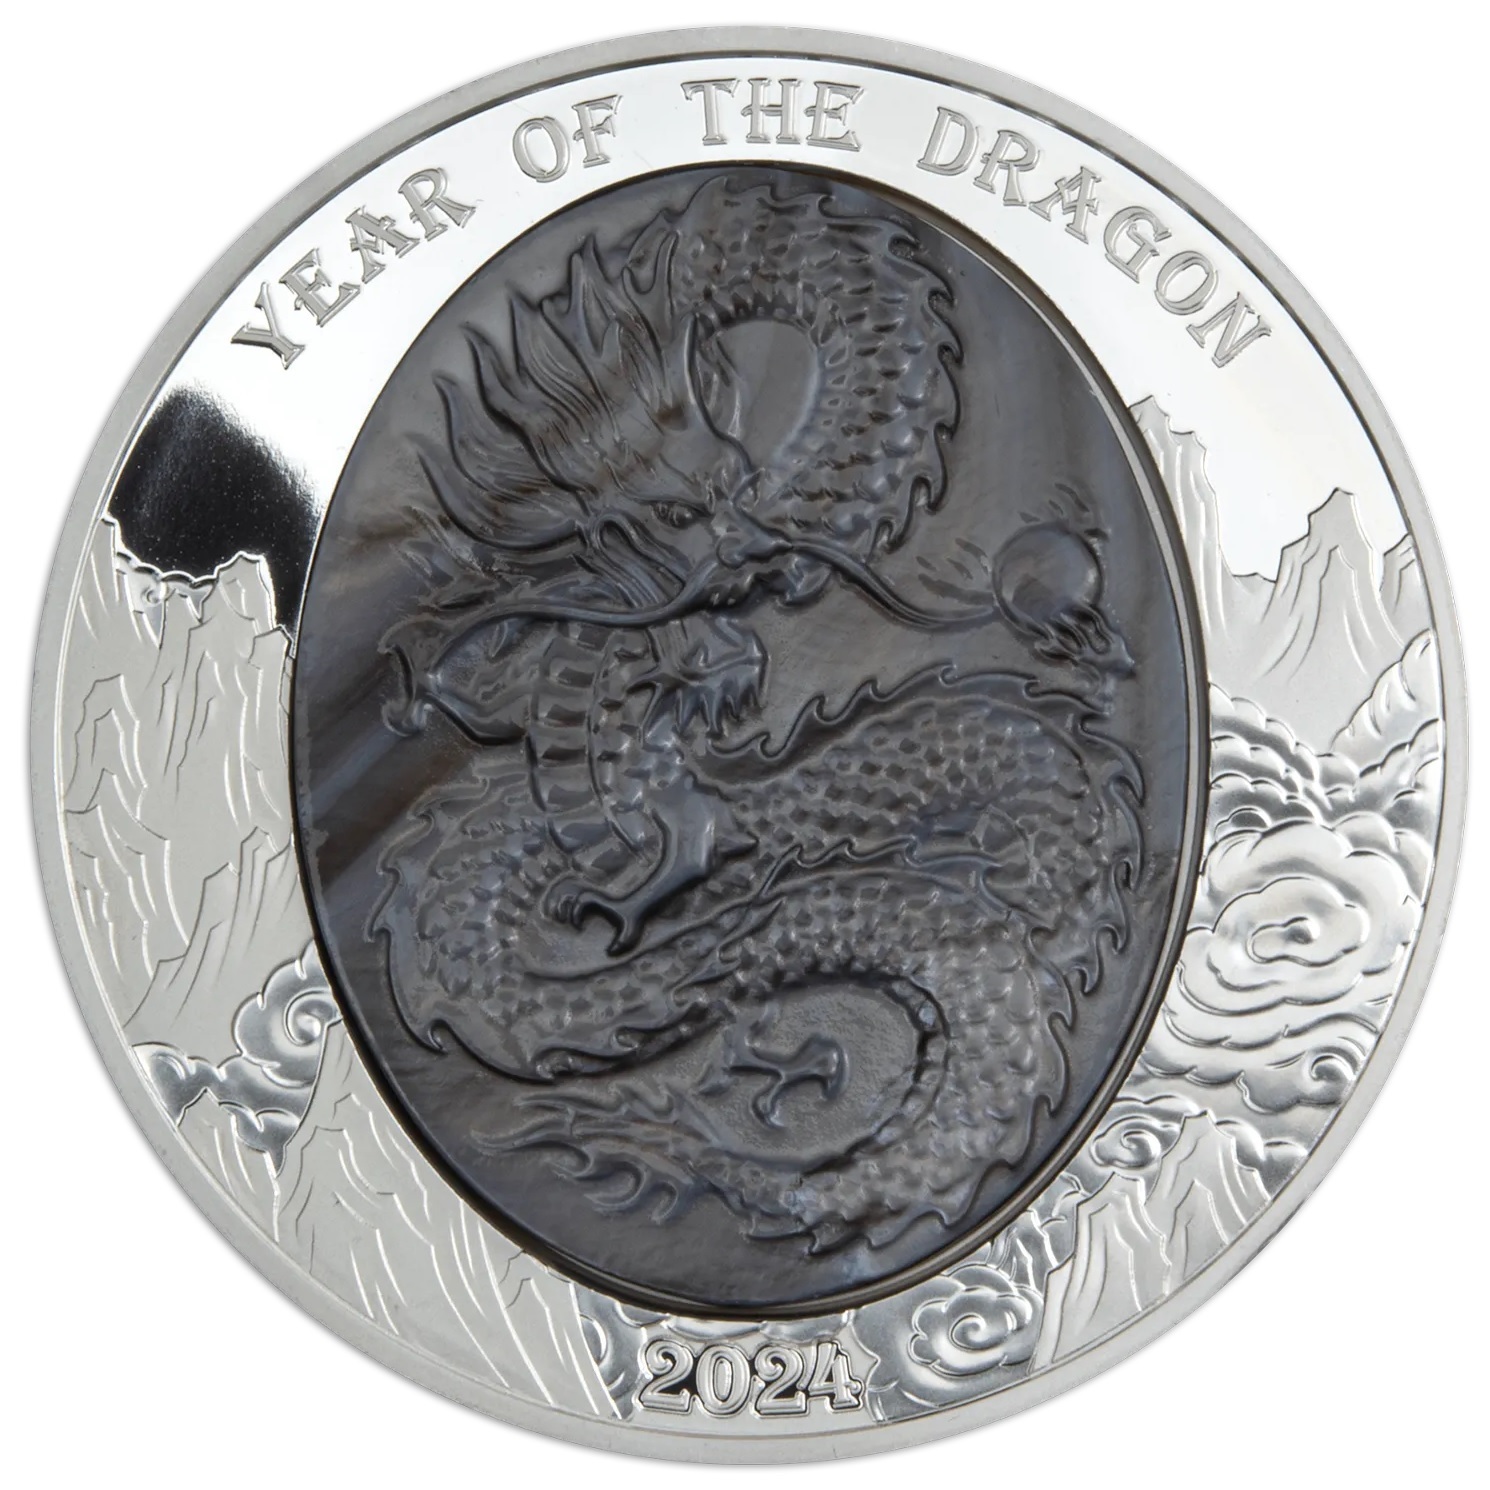 (W106.25.D.2024.5.oz.Ag.1) 25 Dollars Solomon Islands 2024 5 oz Proof silver - Year of the Dragon Reverse (zoom)